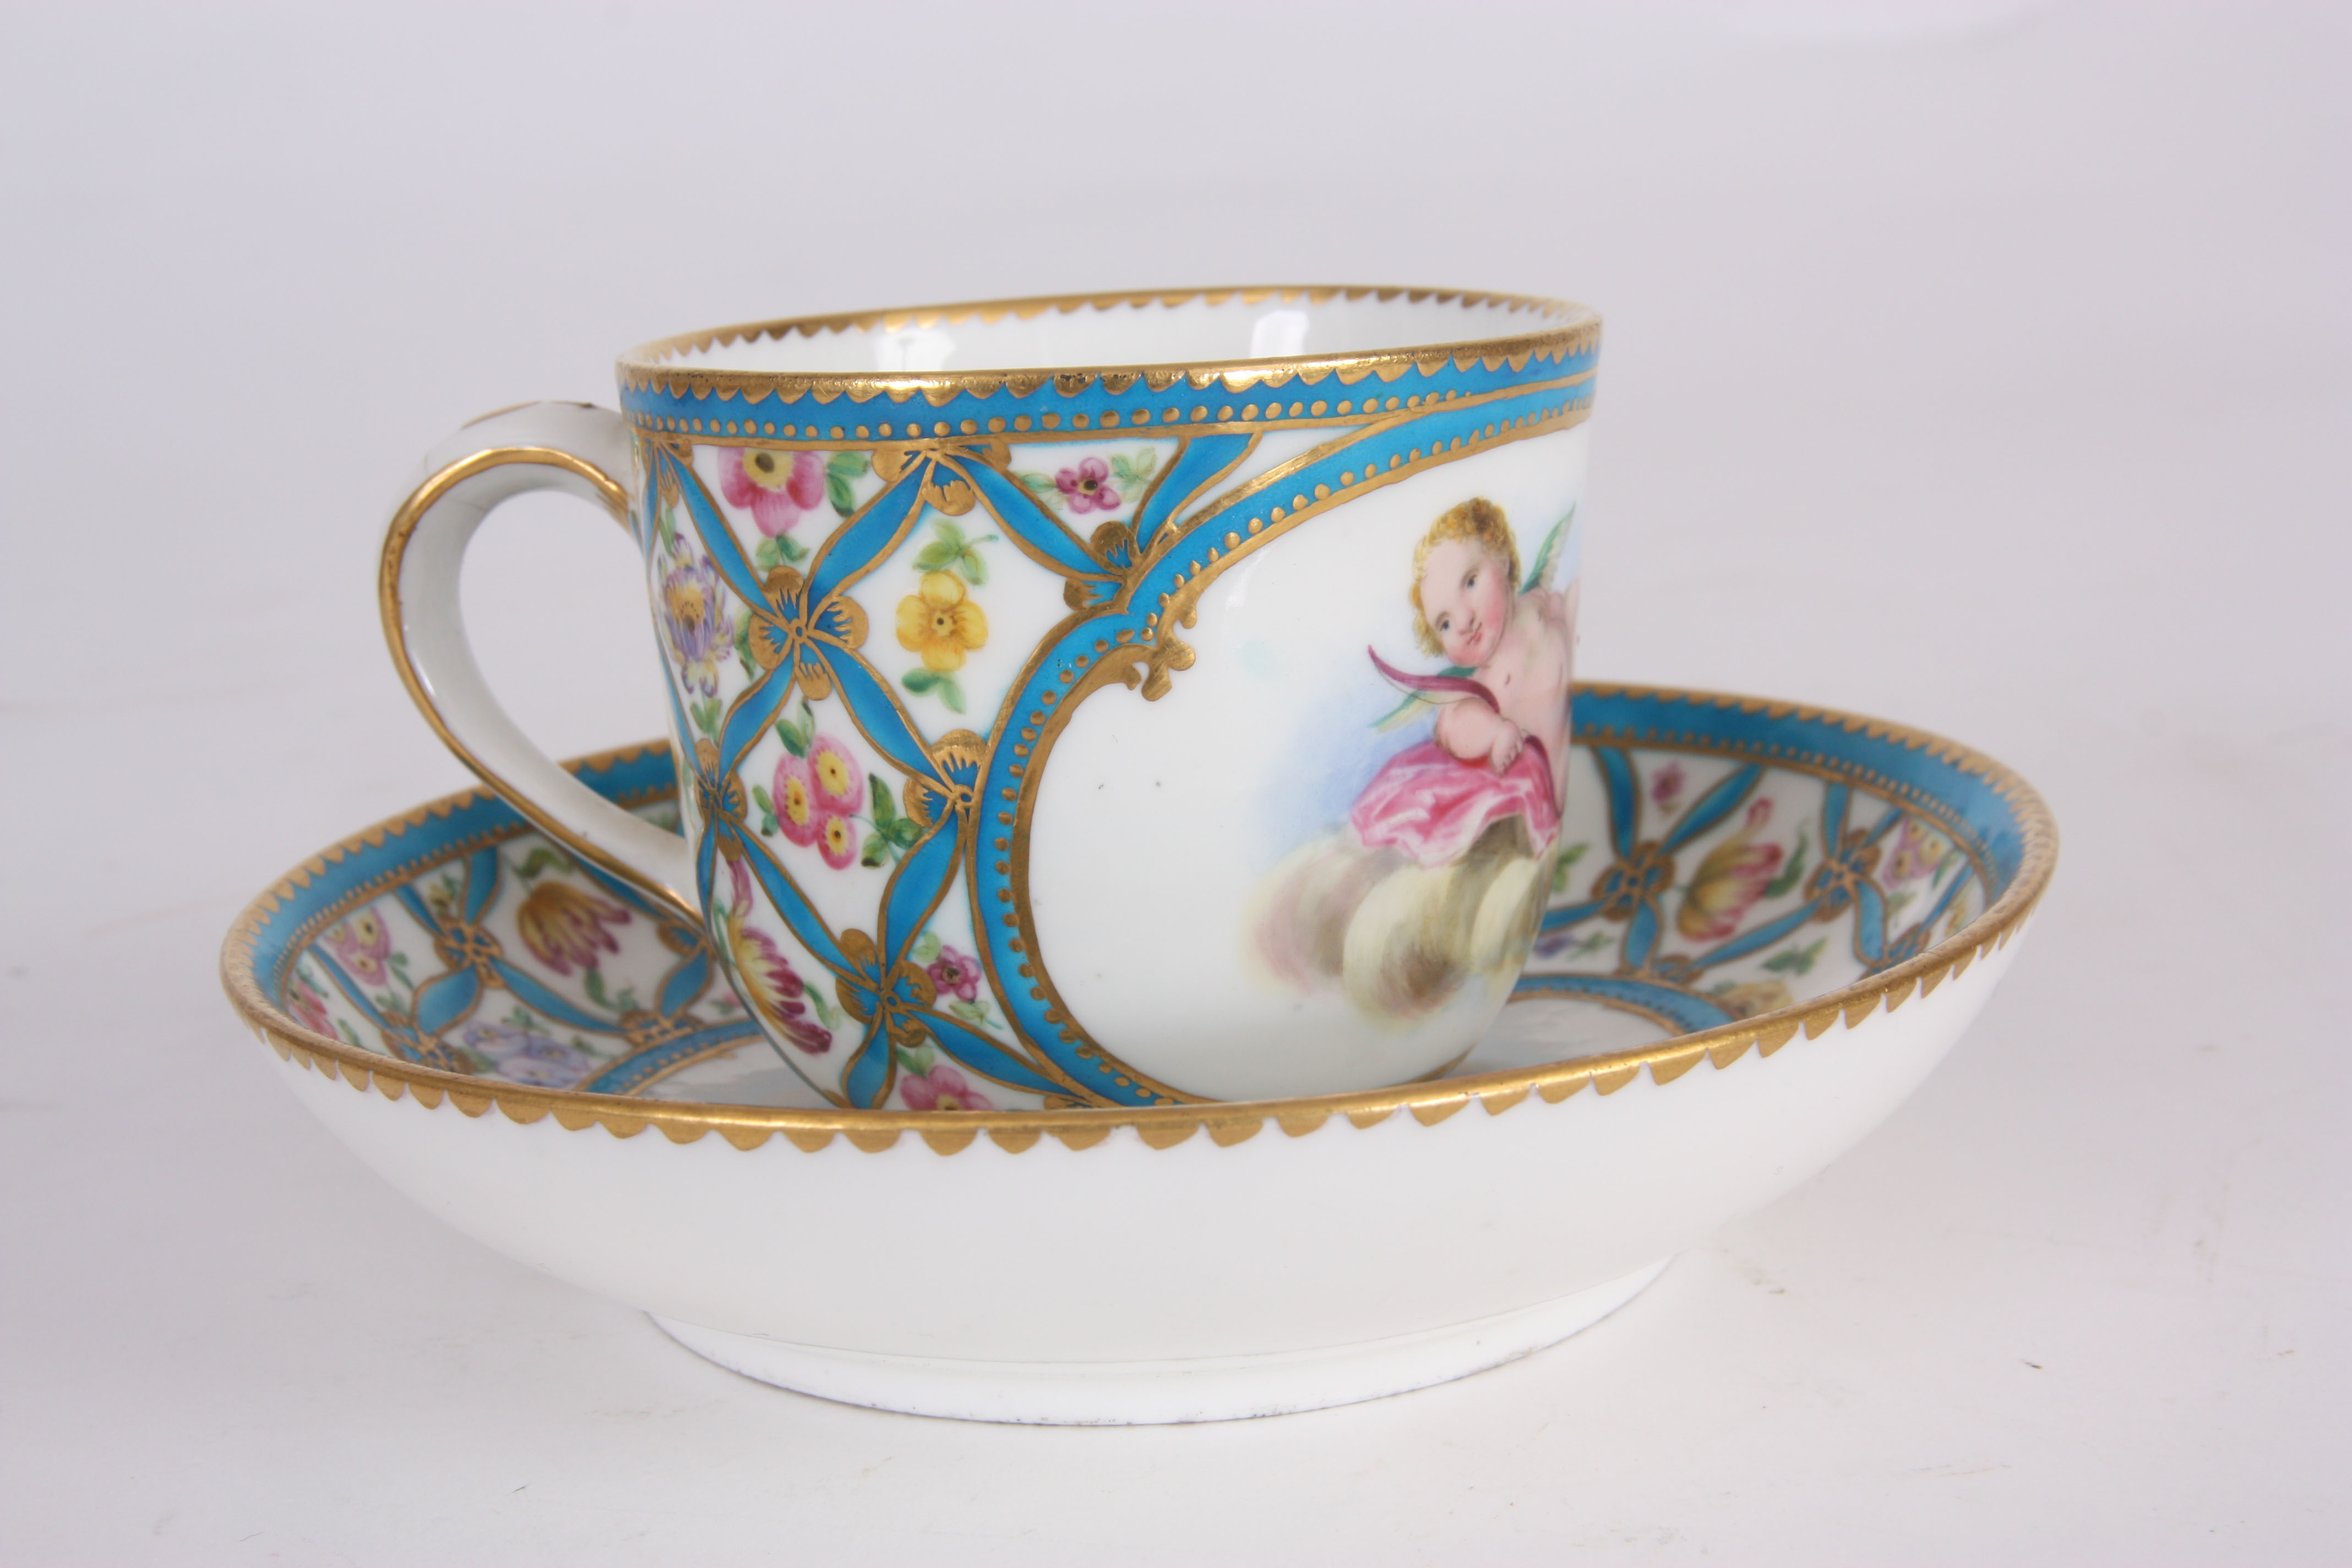 AN EARLY 19th CENTURY SERVES CUP AND SAUCER with flower and blue trellis decoration and painted - Image 4 of 4